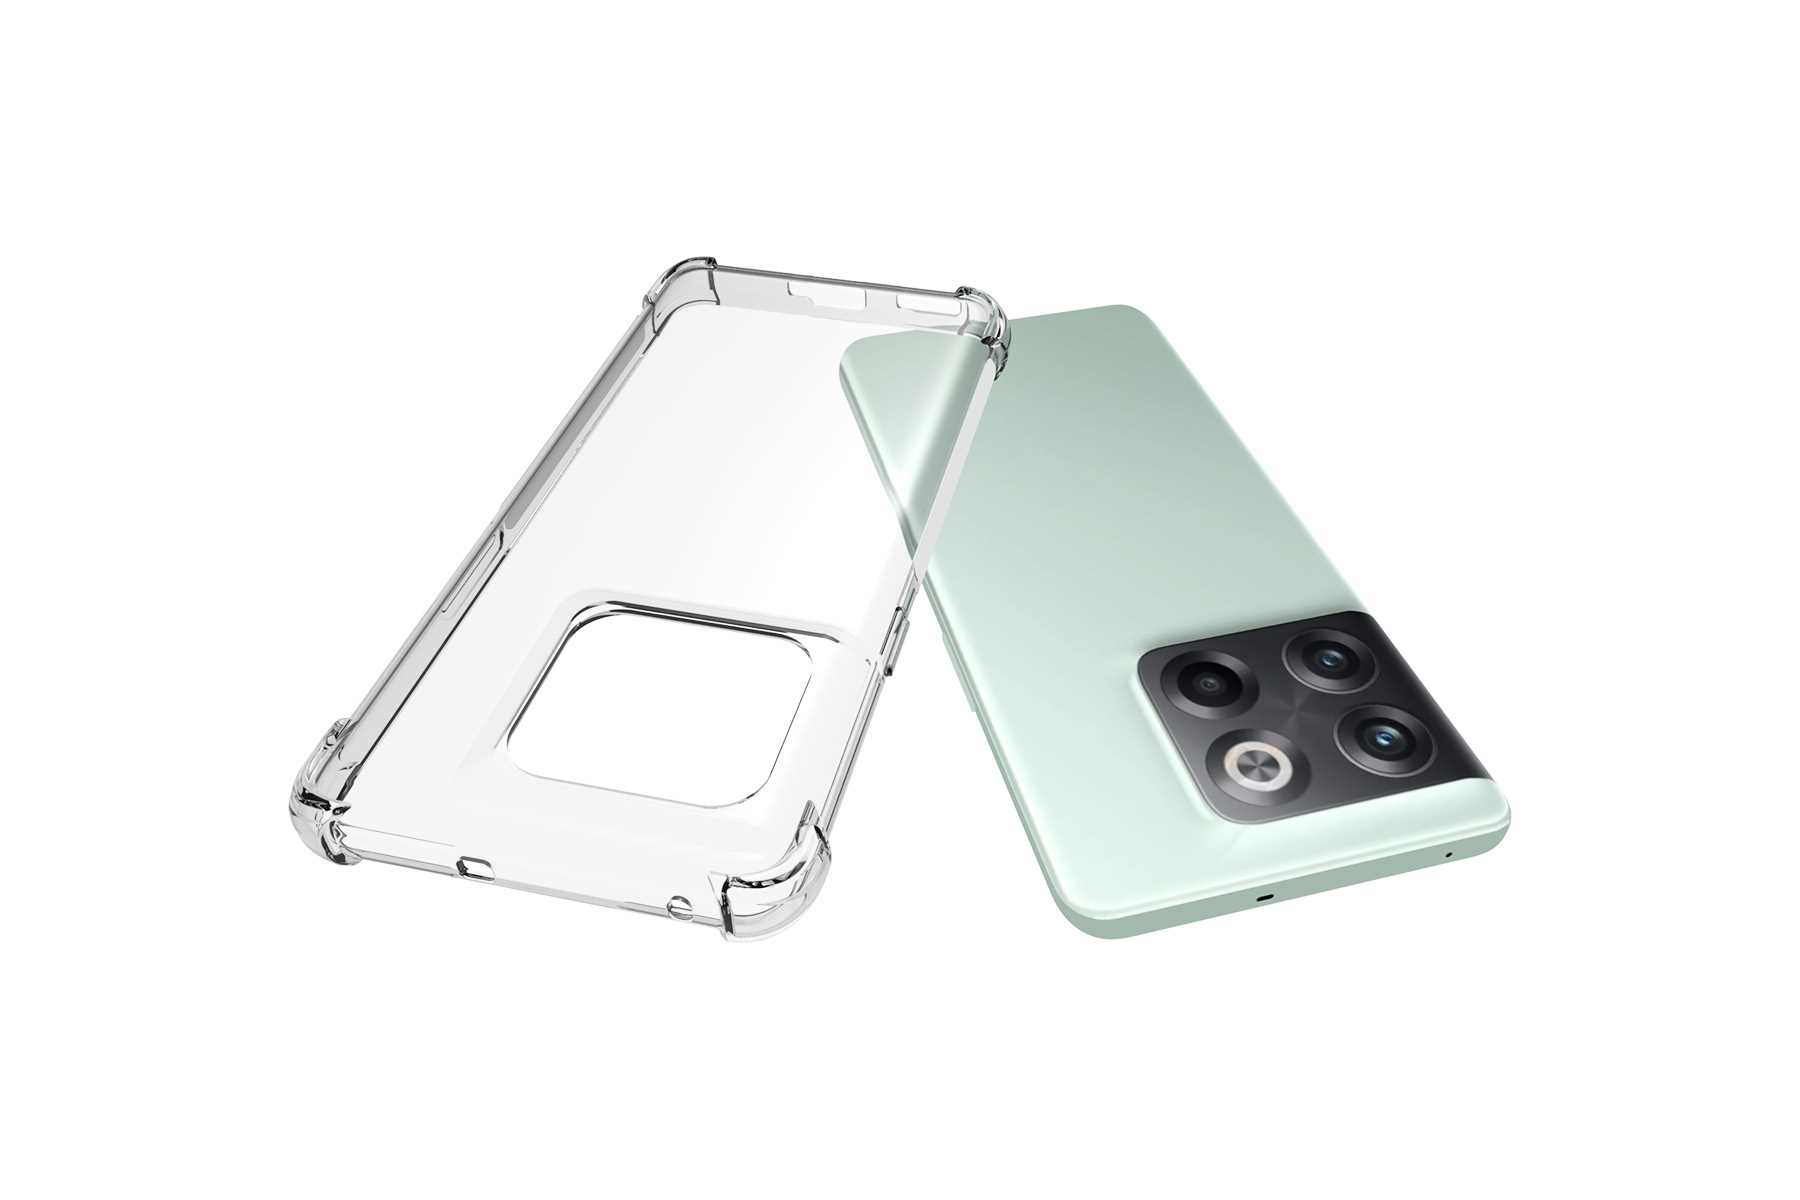 Case, Armor Clear MORE ENERGY OnePlus, 5G, 10T Backcover, Transparent MTB